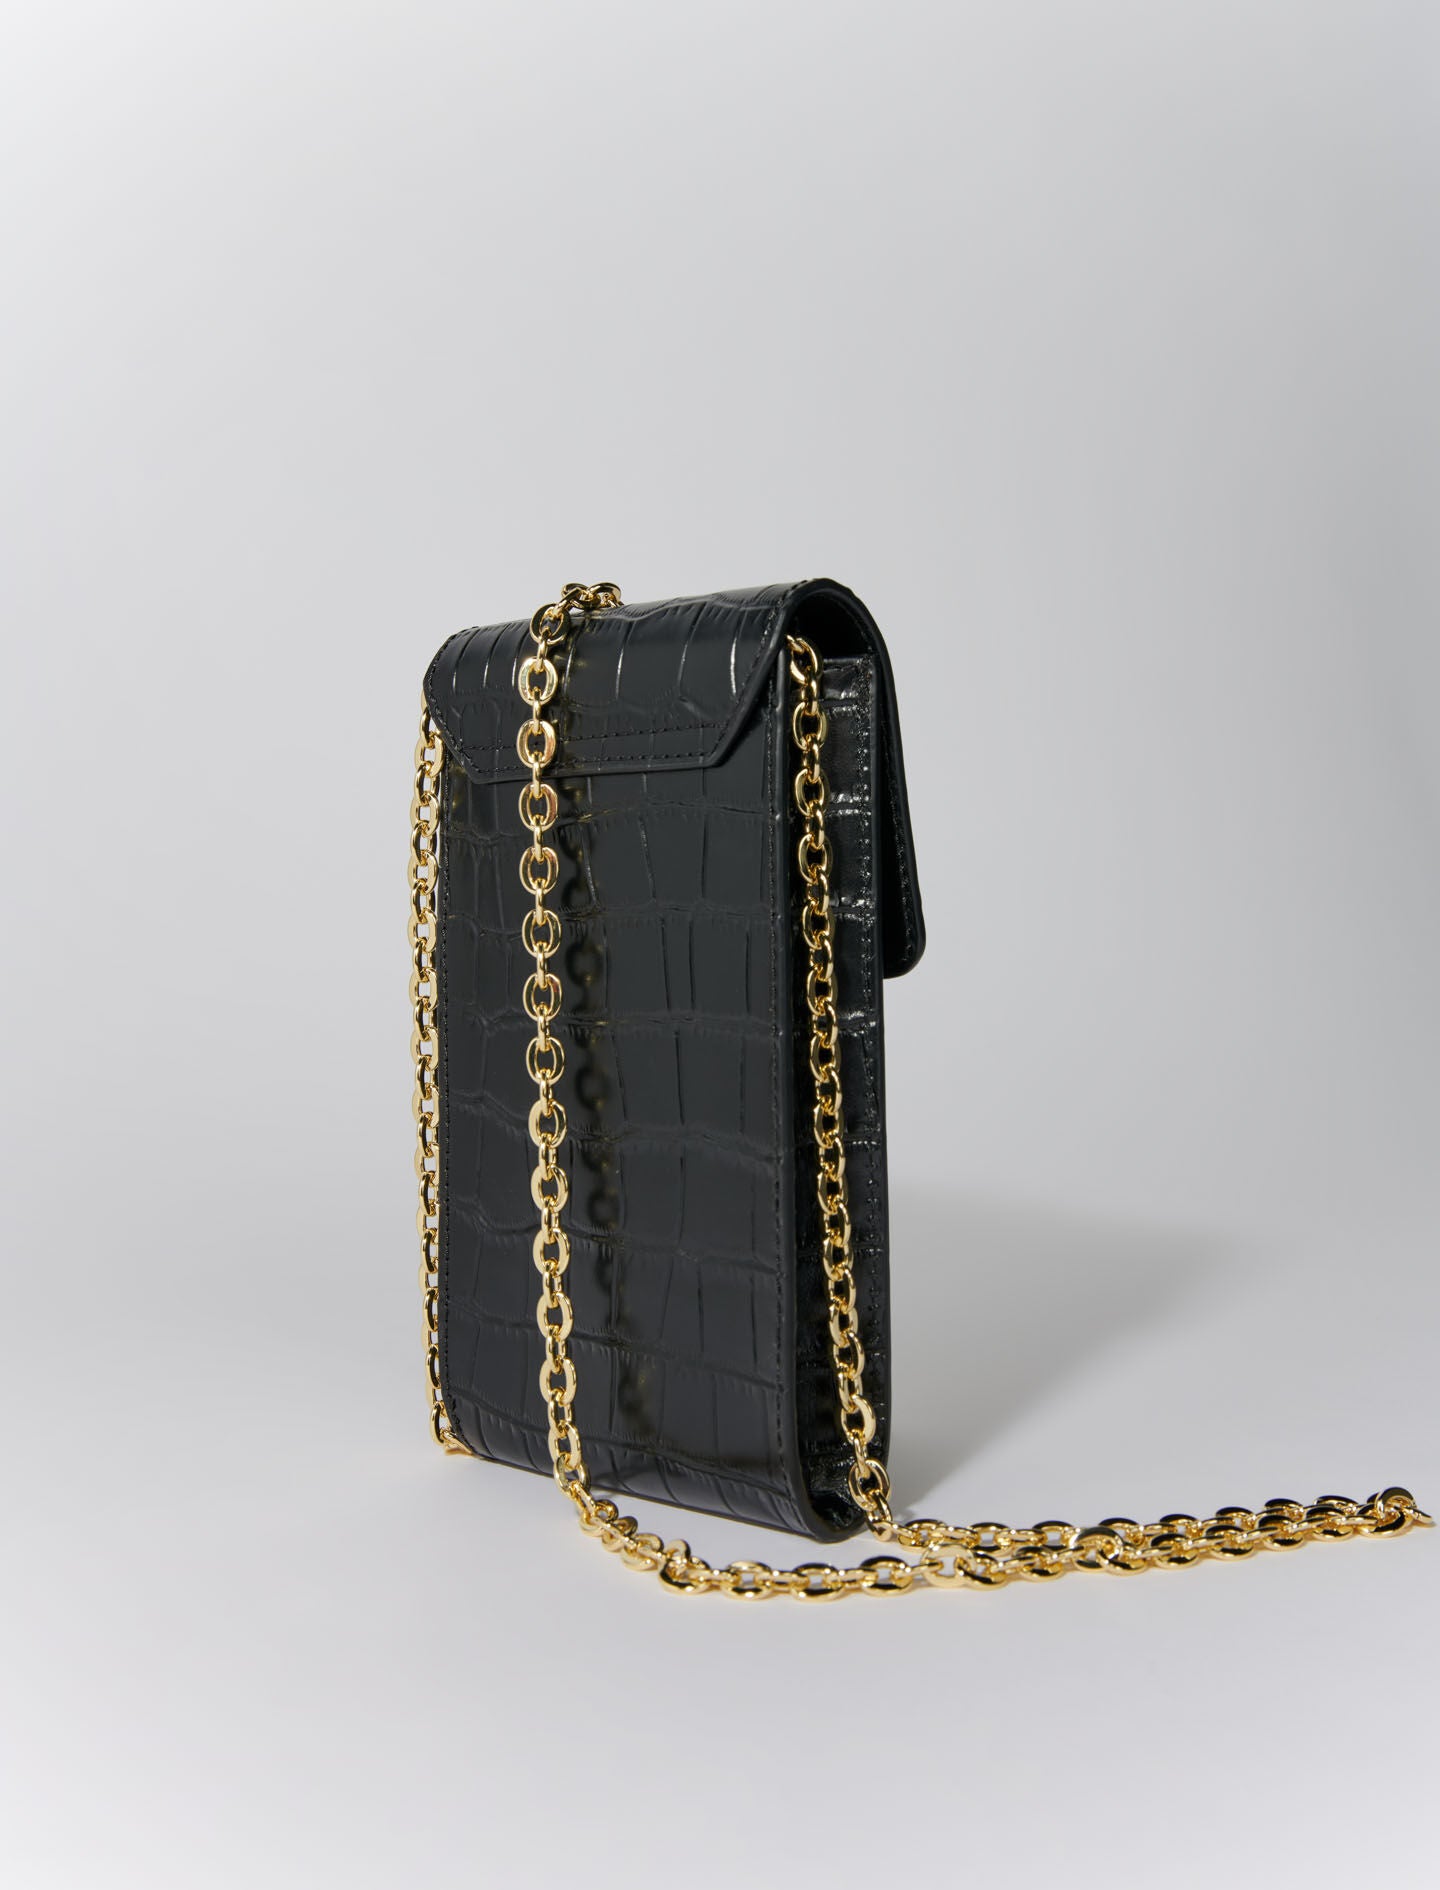 Black-leather phone pouch